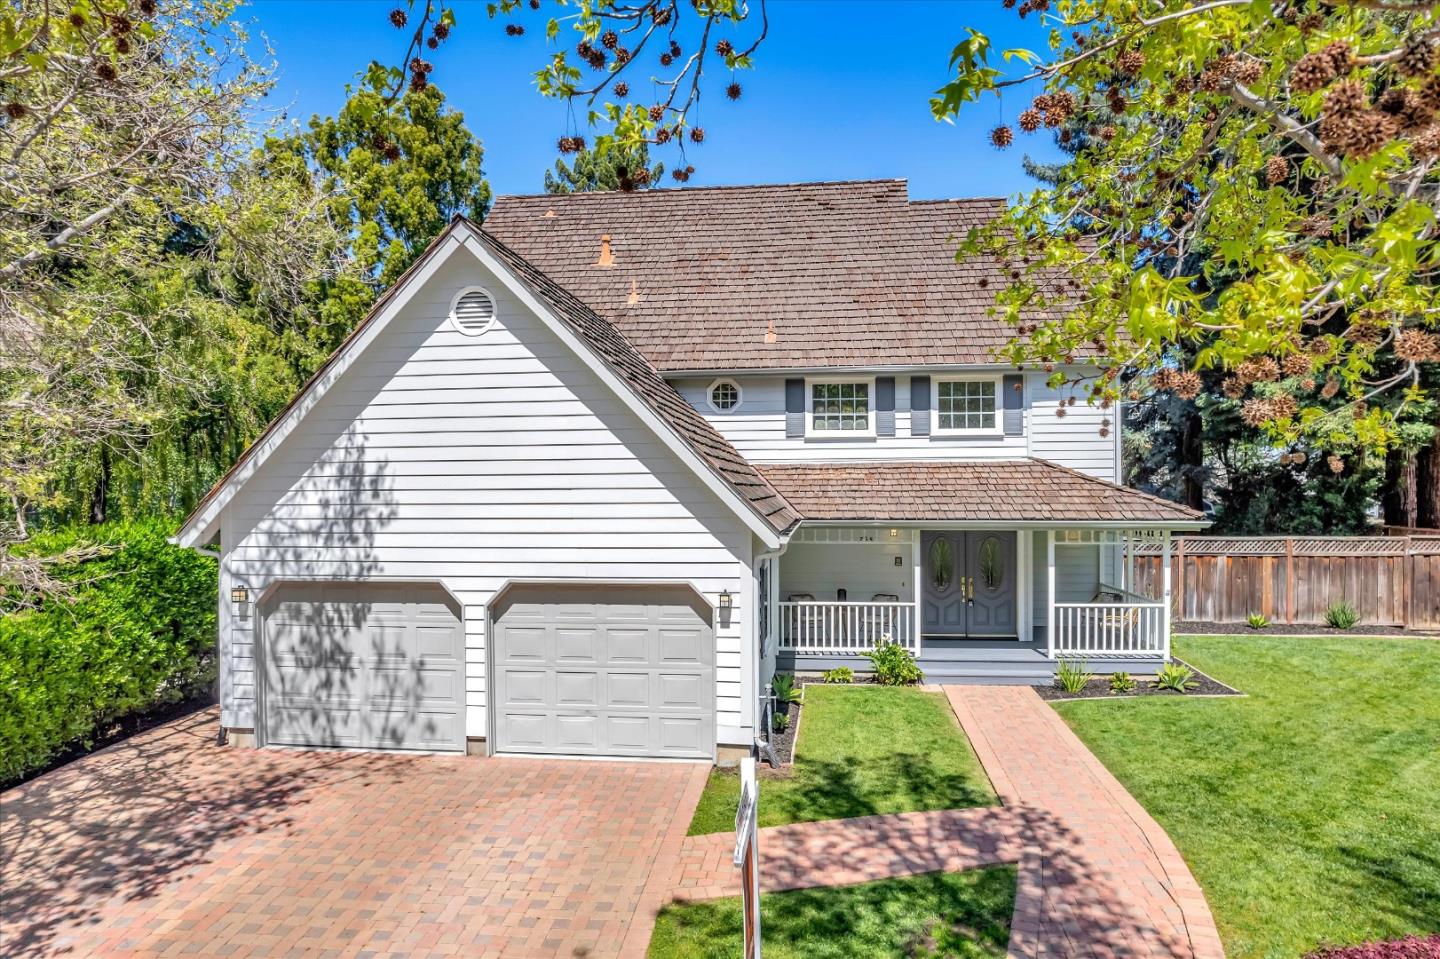 Photo of 795 Glenborough Dr in Mountain View, CA